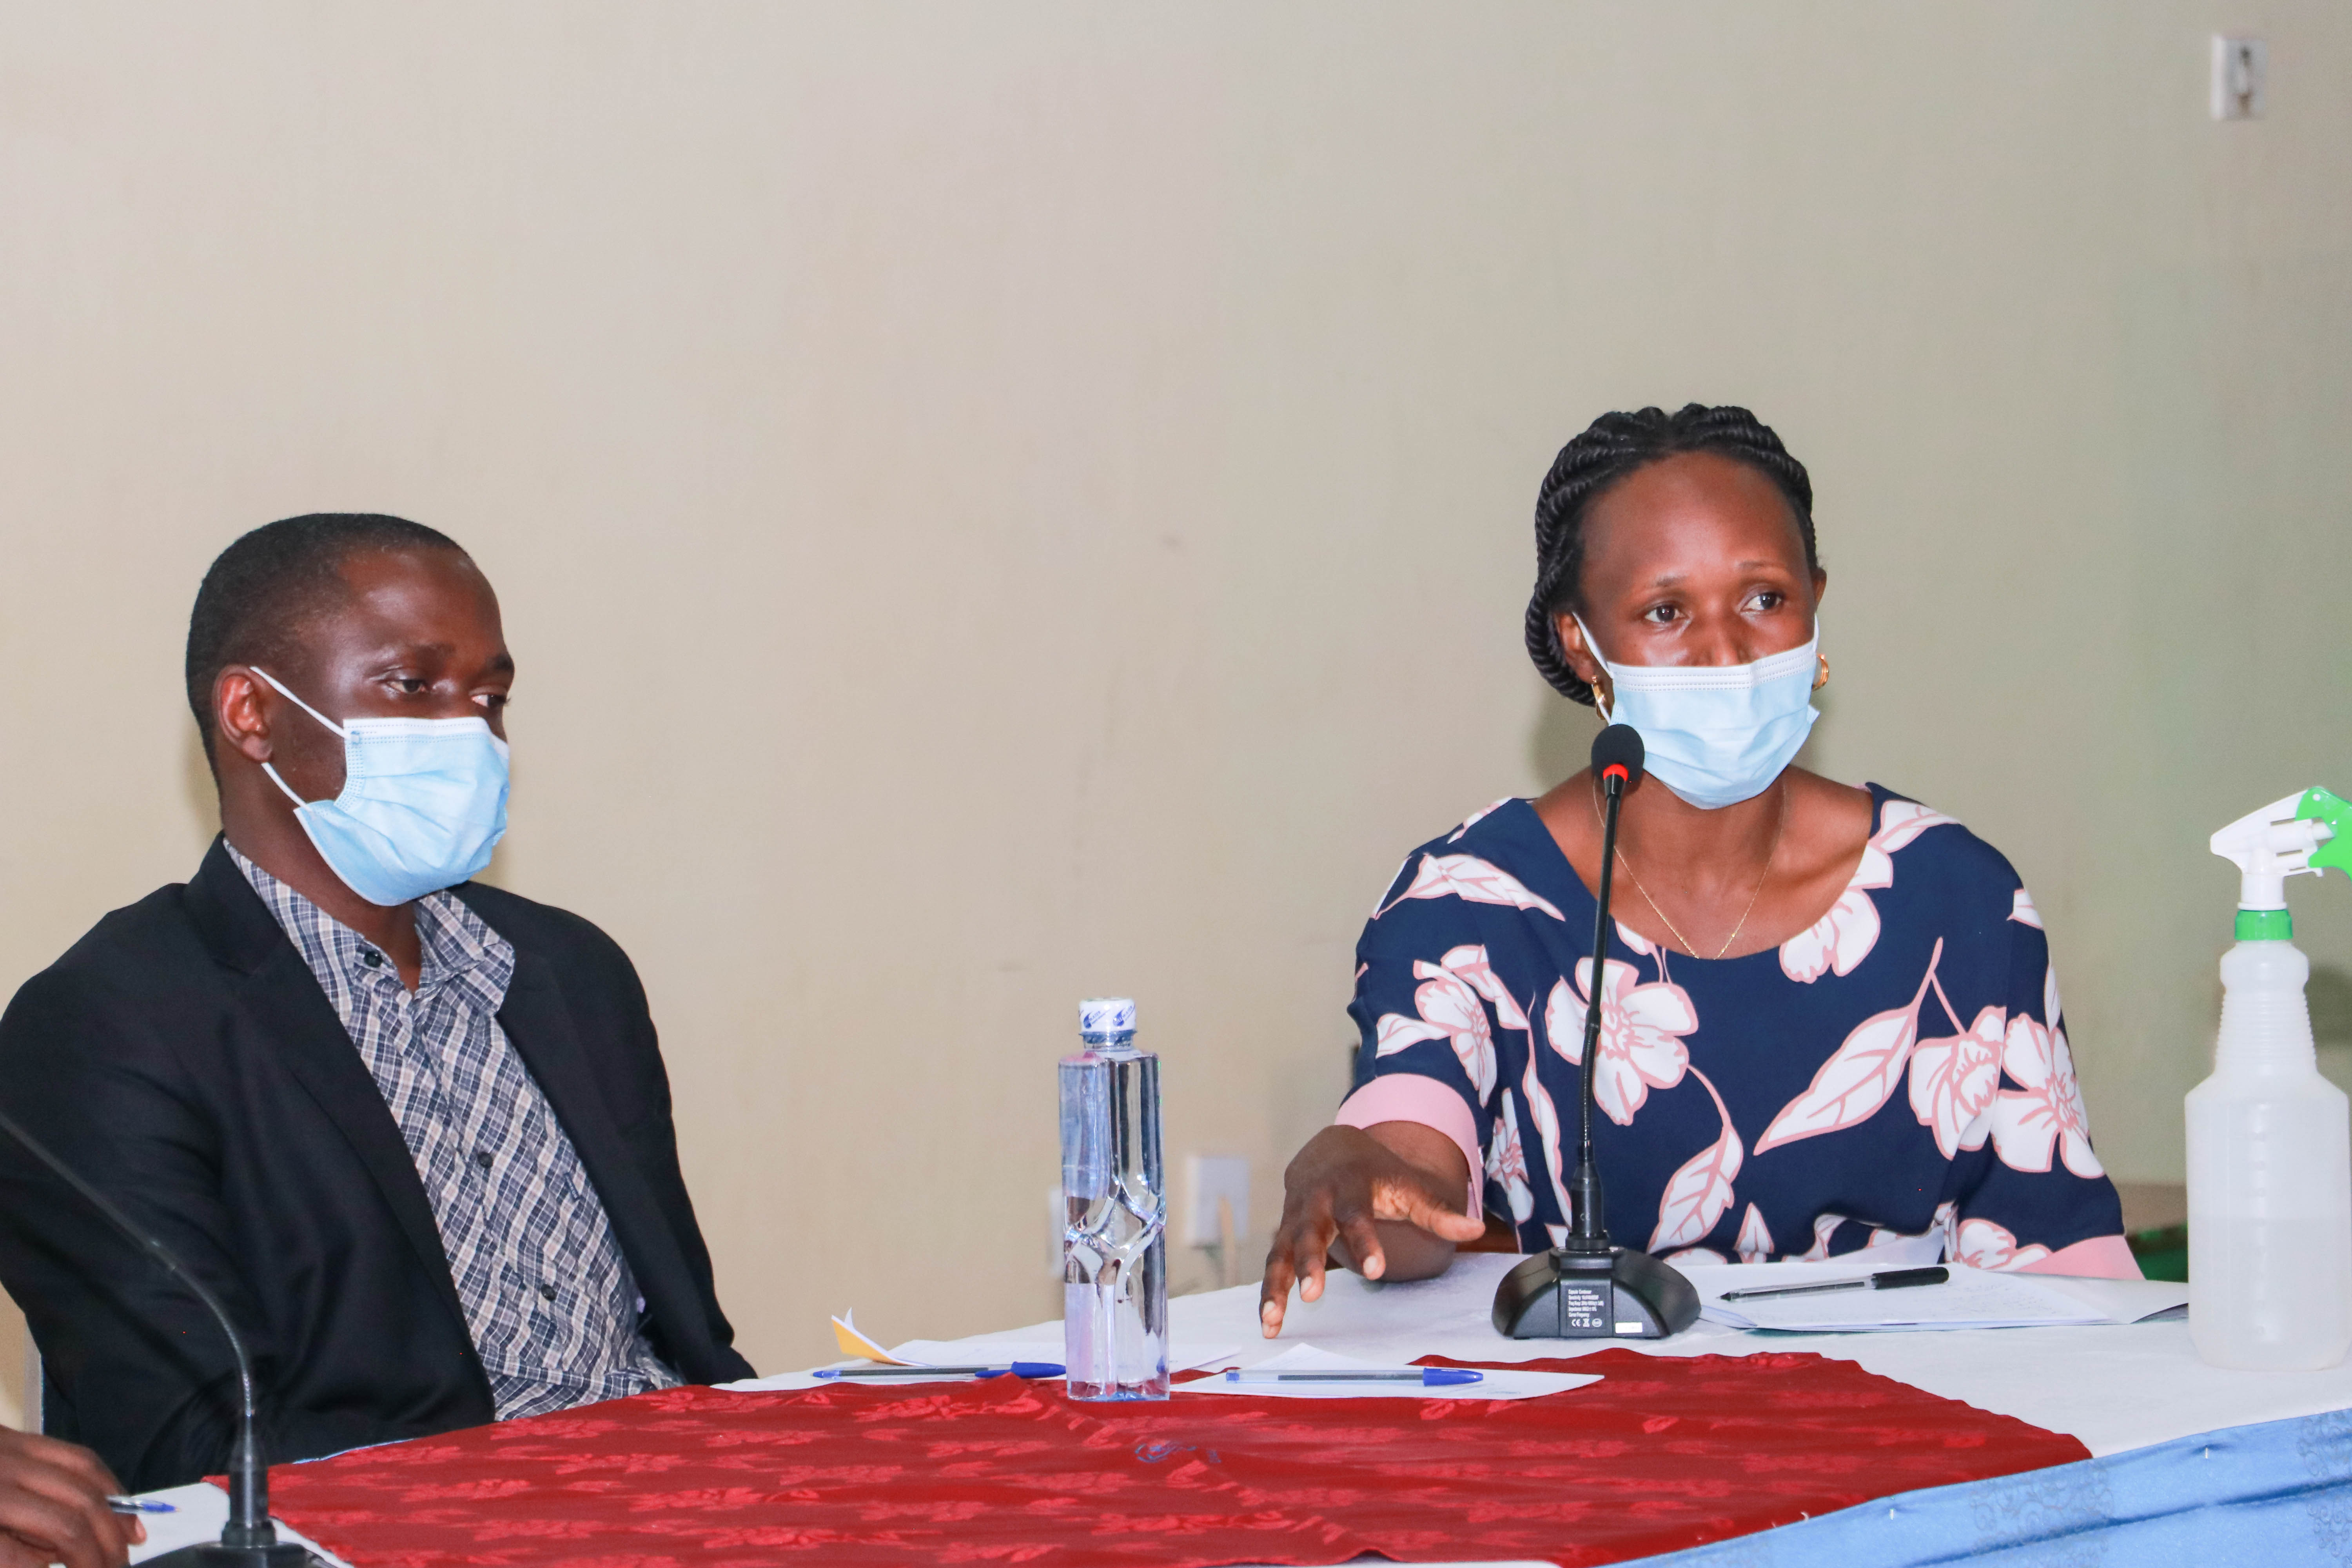  Dr Josephine Birungi Research Scientist based at Medical Research Council/Uganda Virus Research Institute (MRC/UVRI) and Dr. Isaac Ssinabulya, Cardiologist at the Uganda Heart Institute -UHI